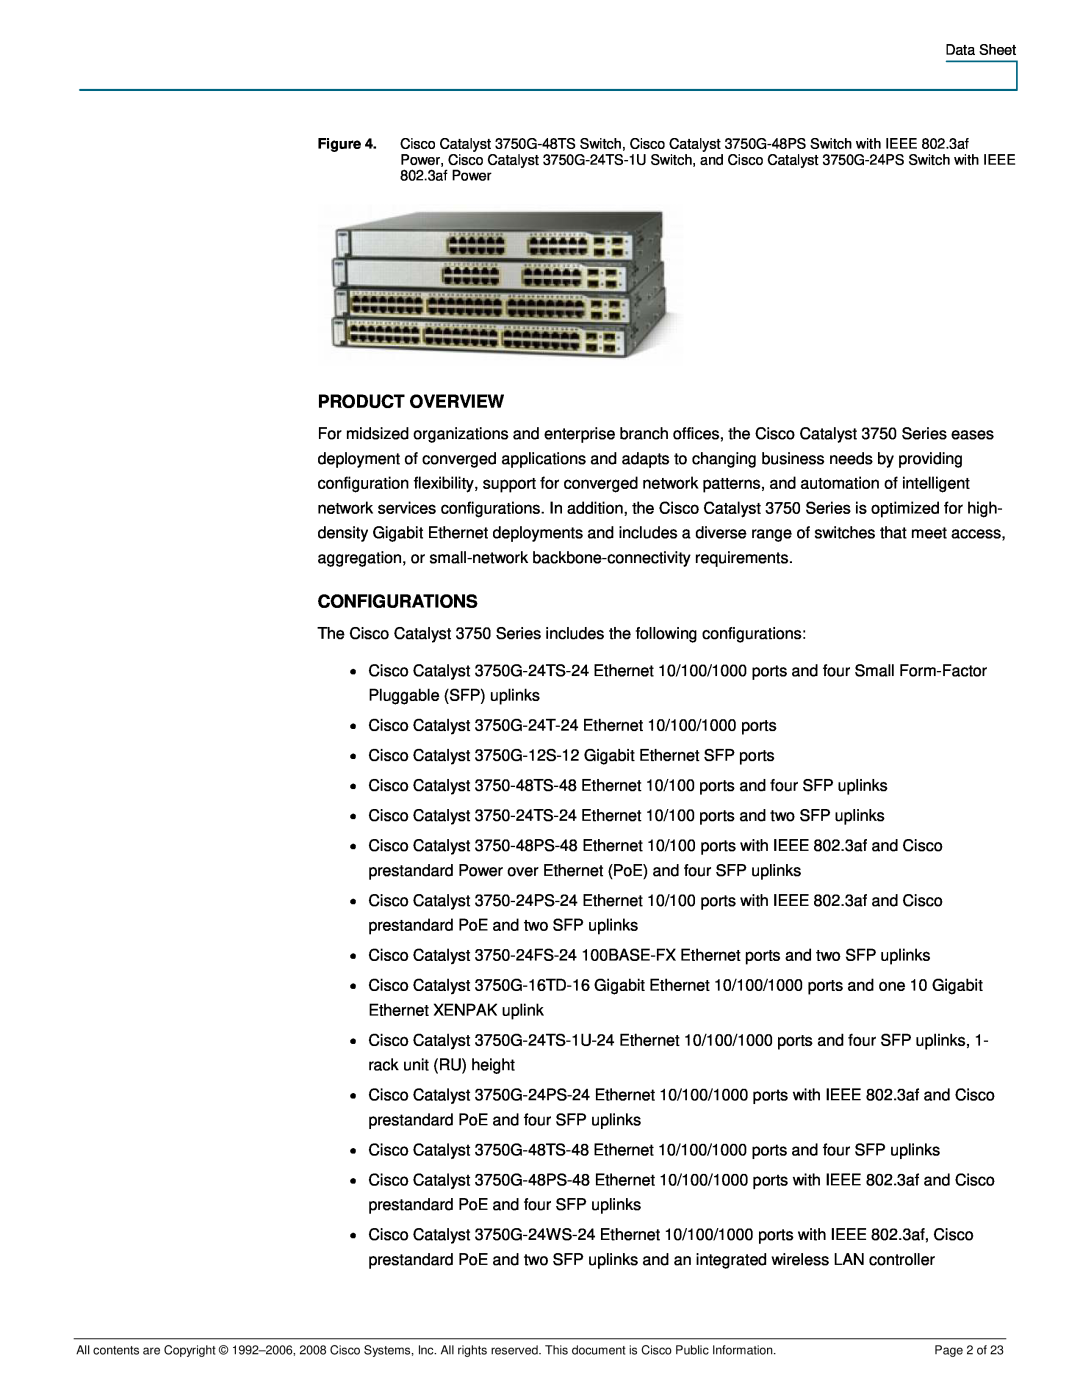 Cisco Systems 3750-24PS, 3750-48PS manual Product Overview, Configurations 